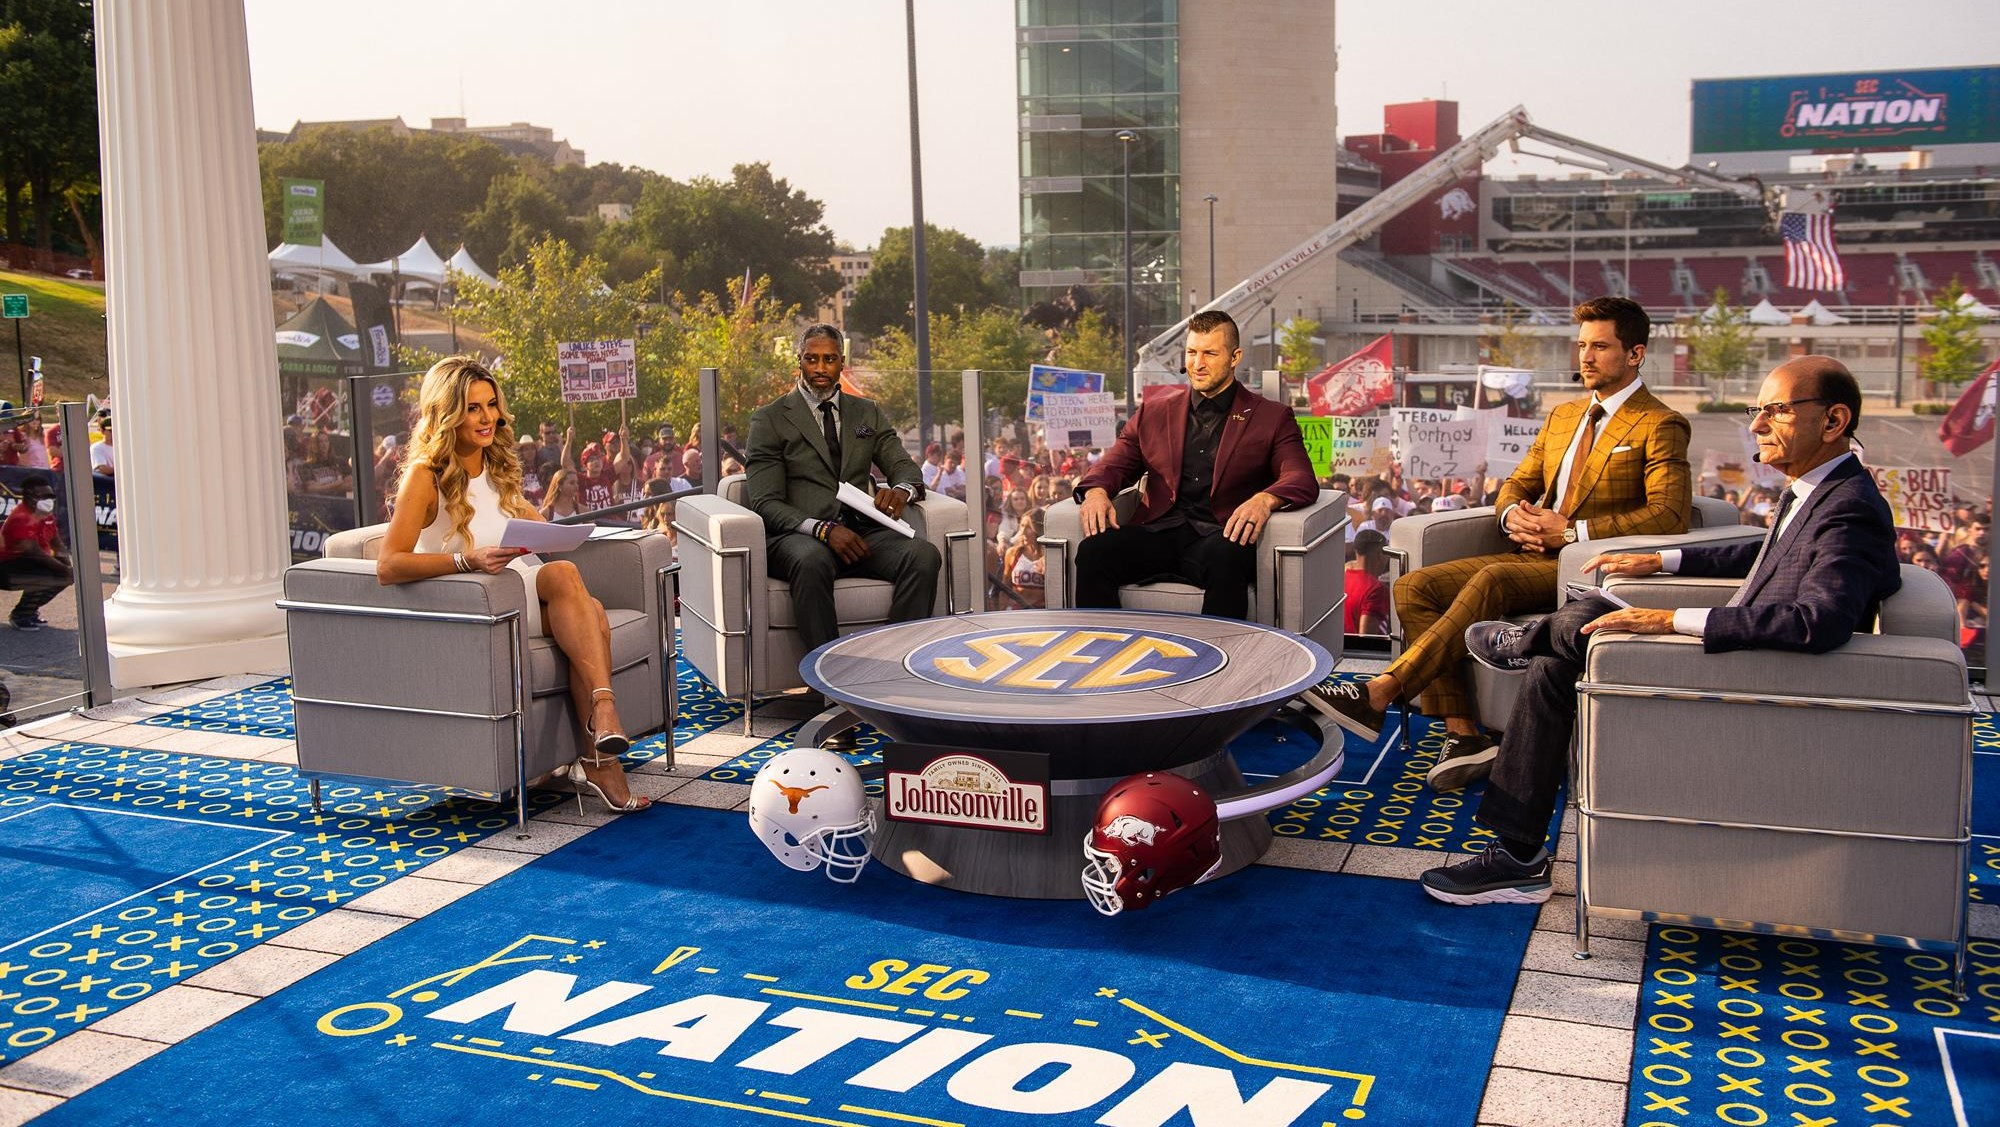 SEC Nation Presented by Academy Sports + Outdoors Comes to Columbia